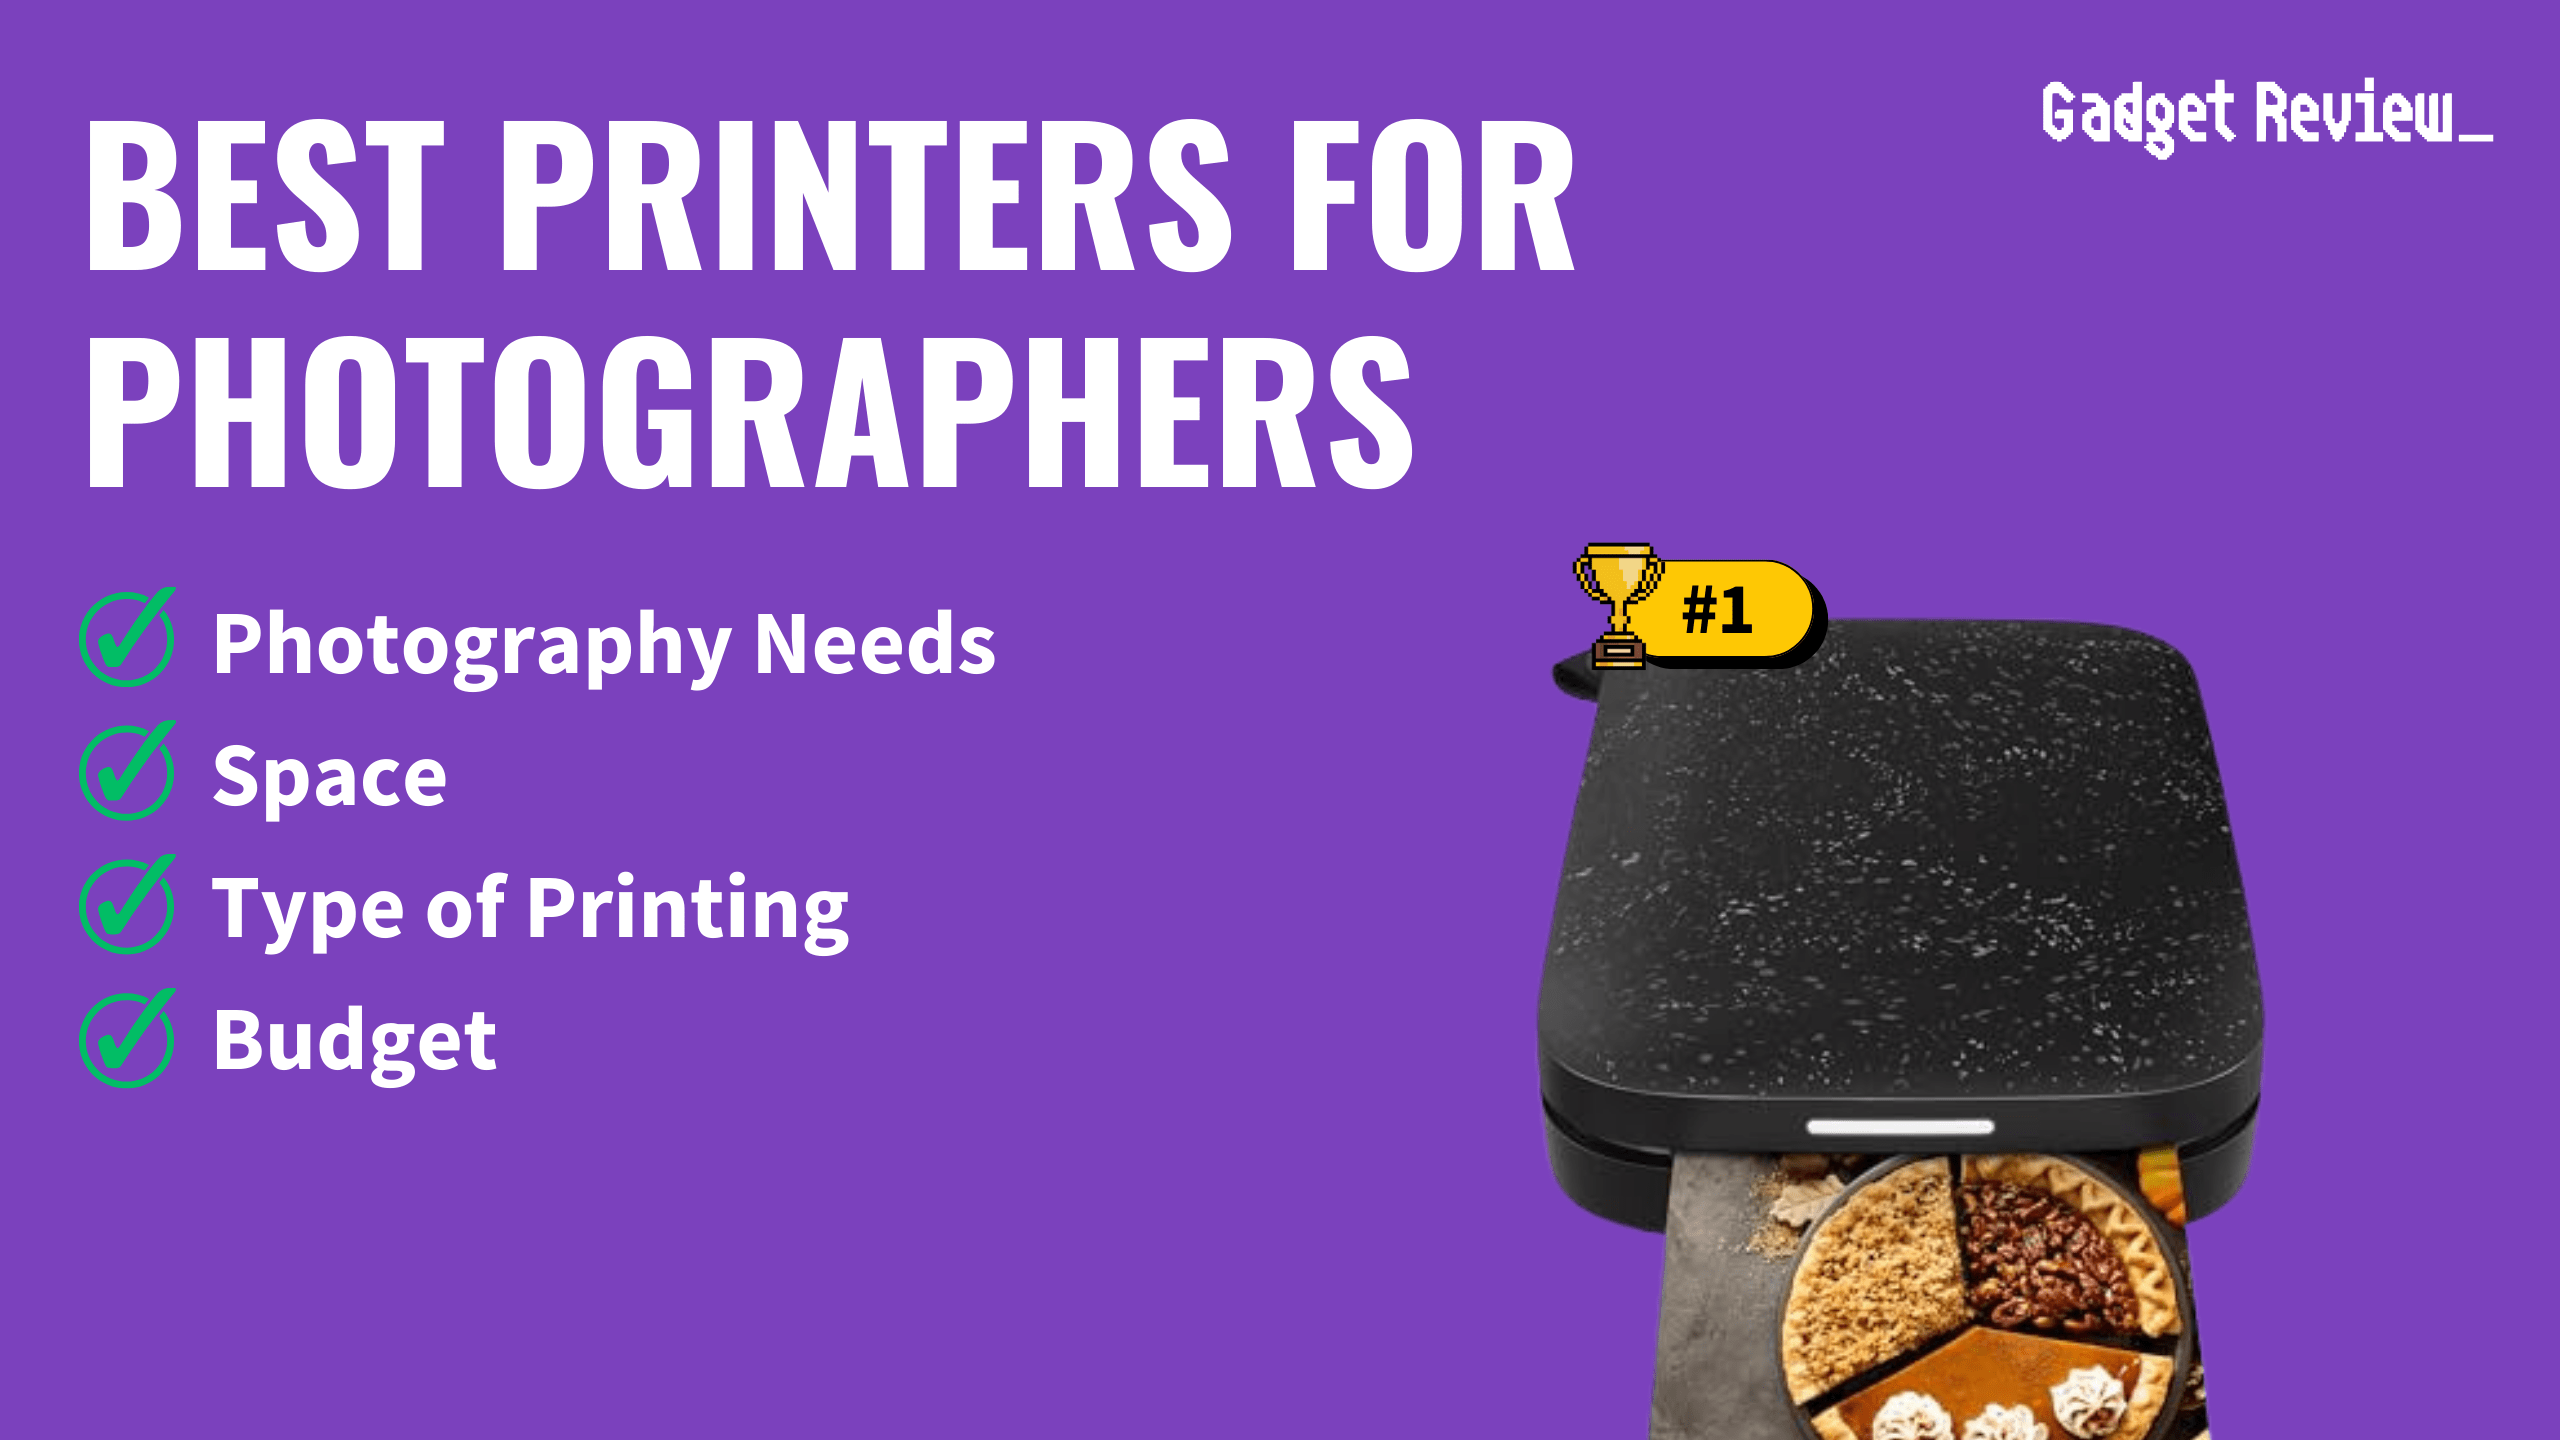 Best Printers for Photographers